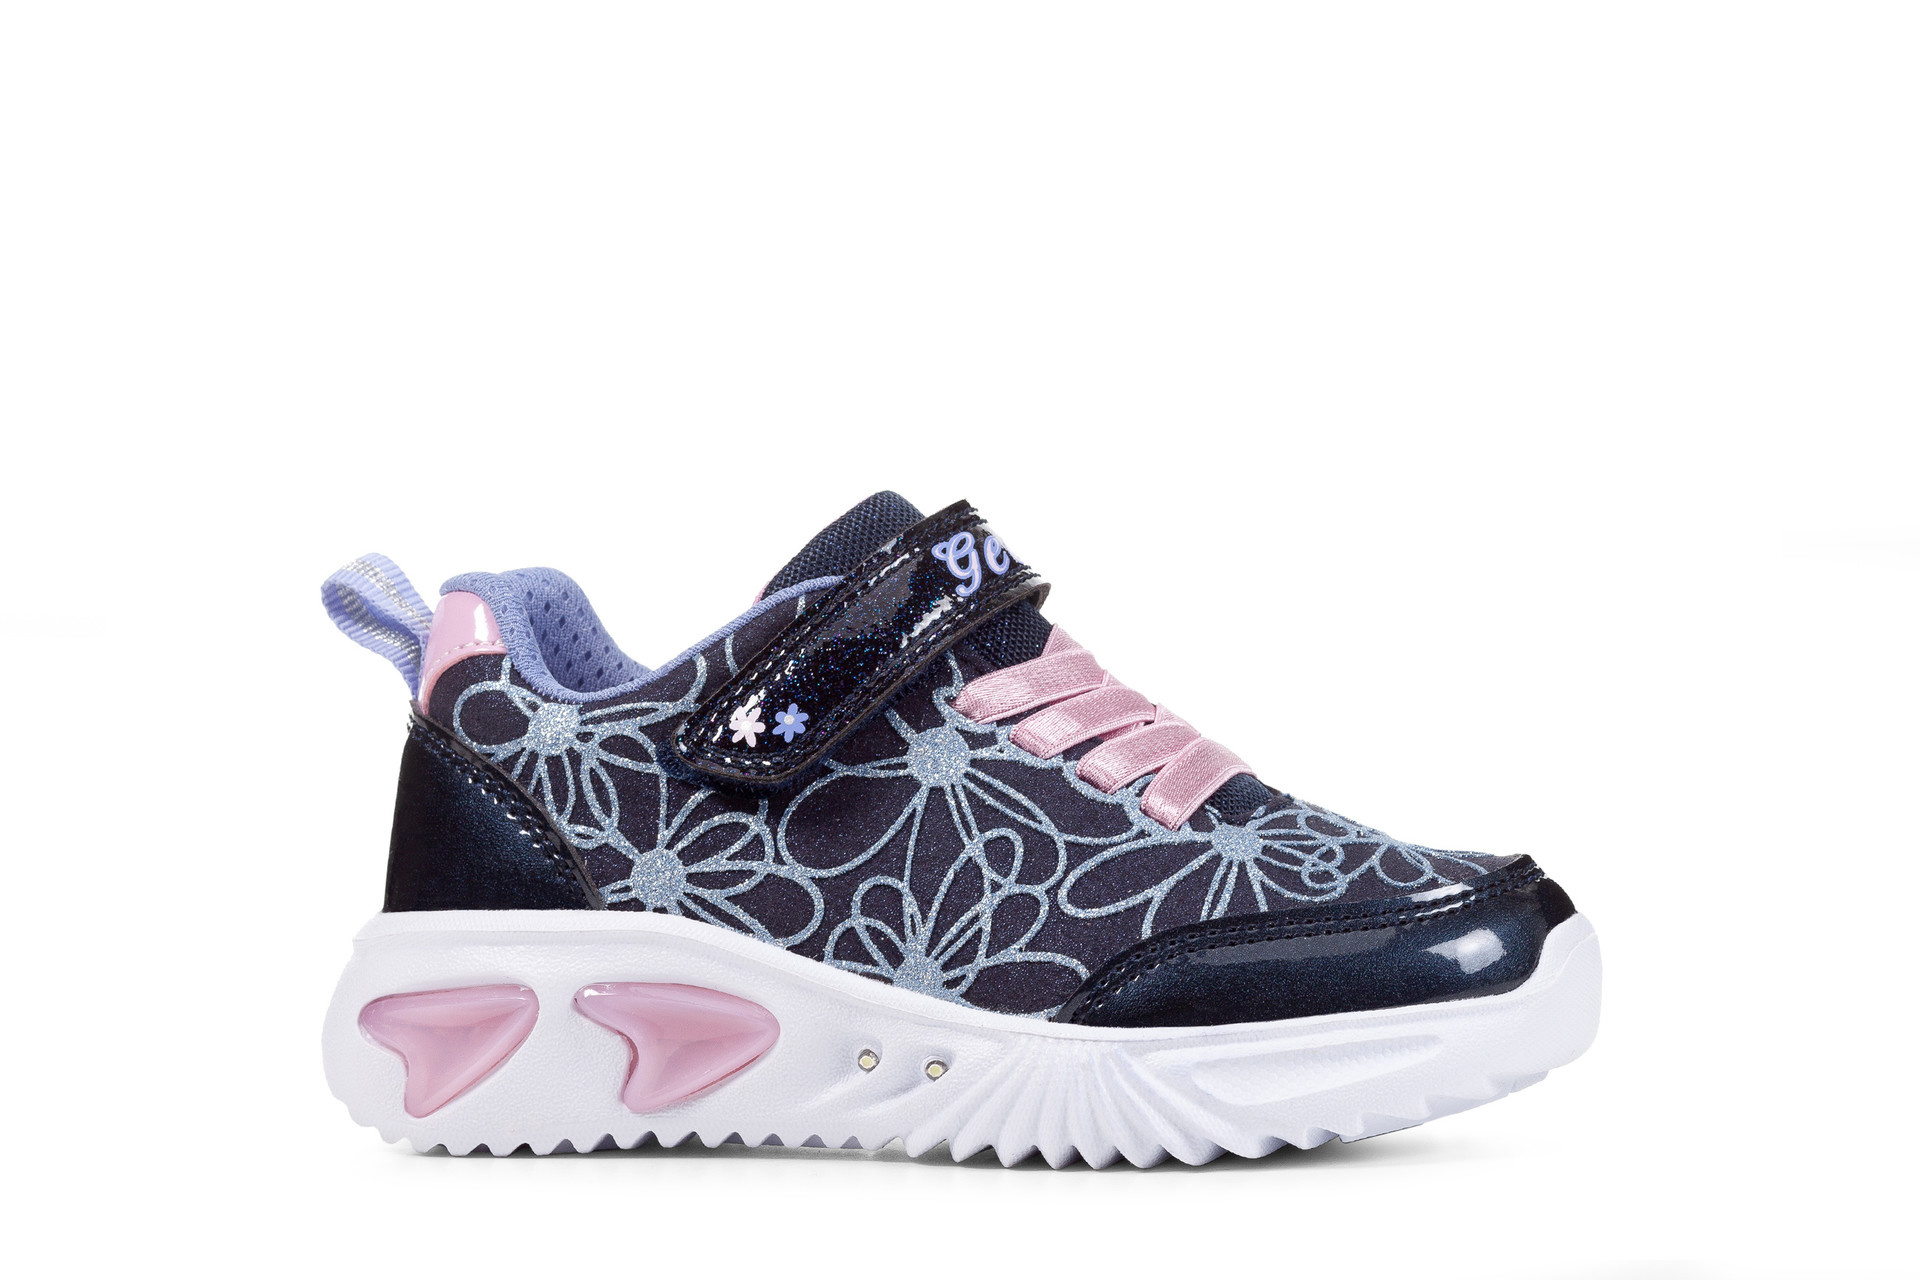 Geox Assister Navy/Pink